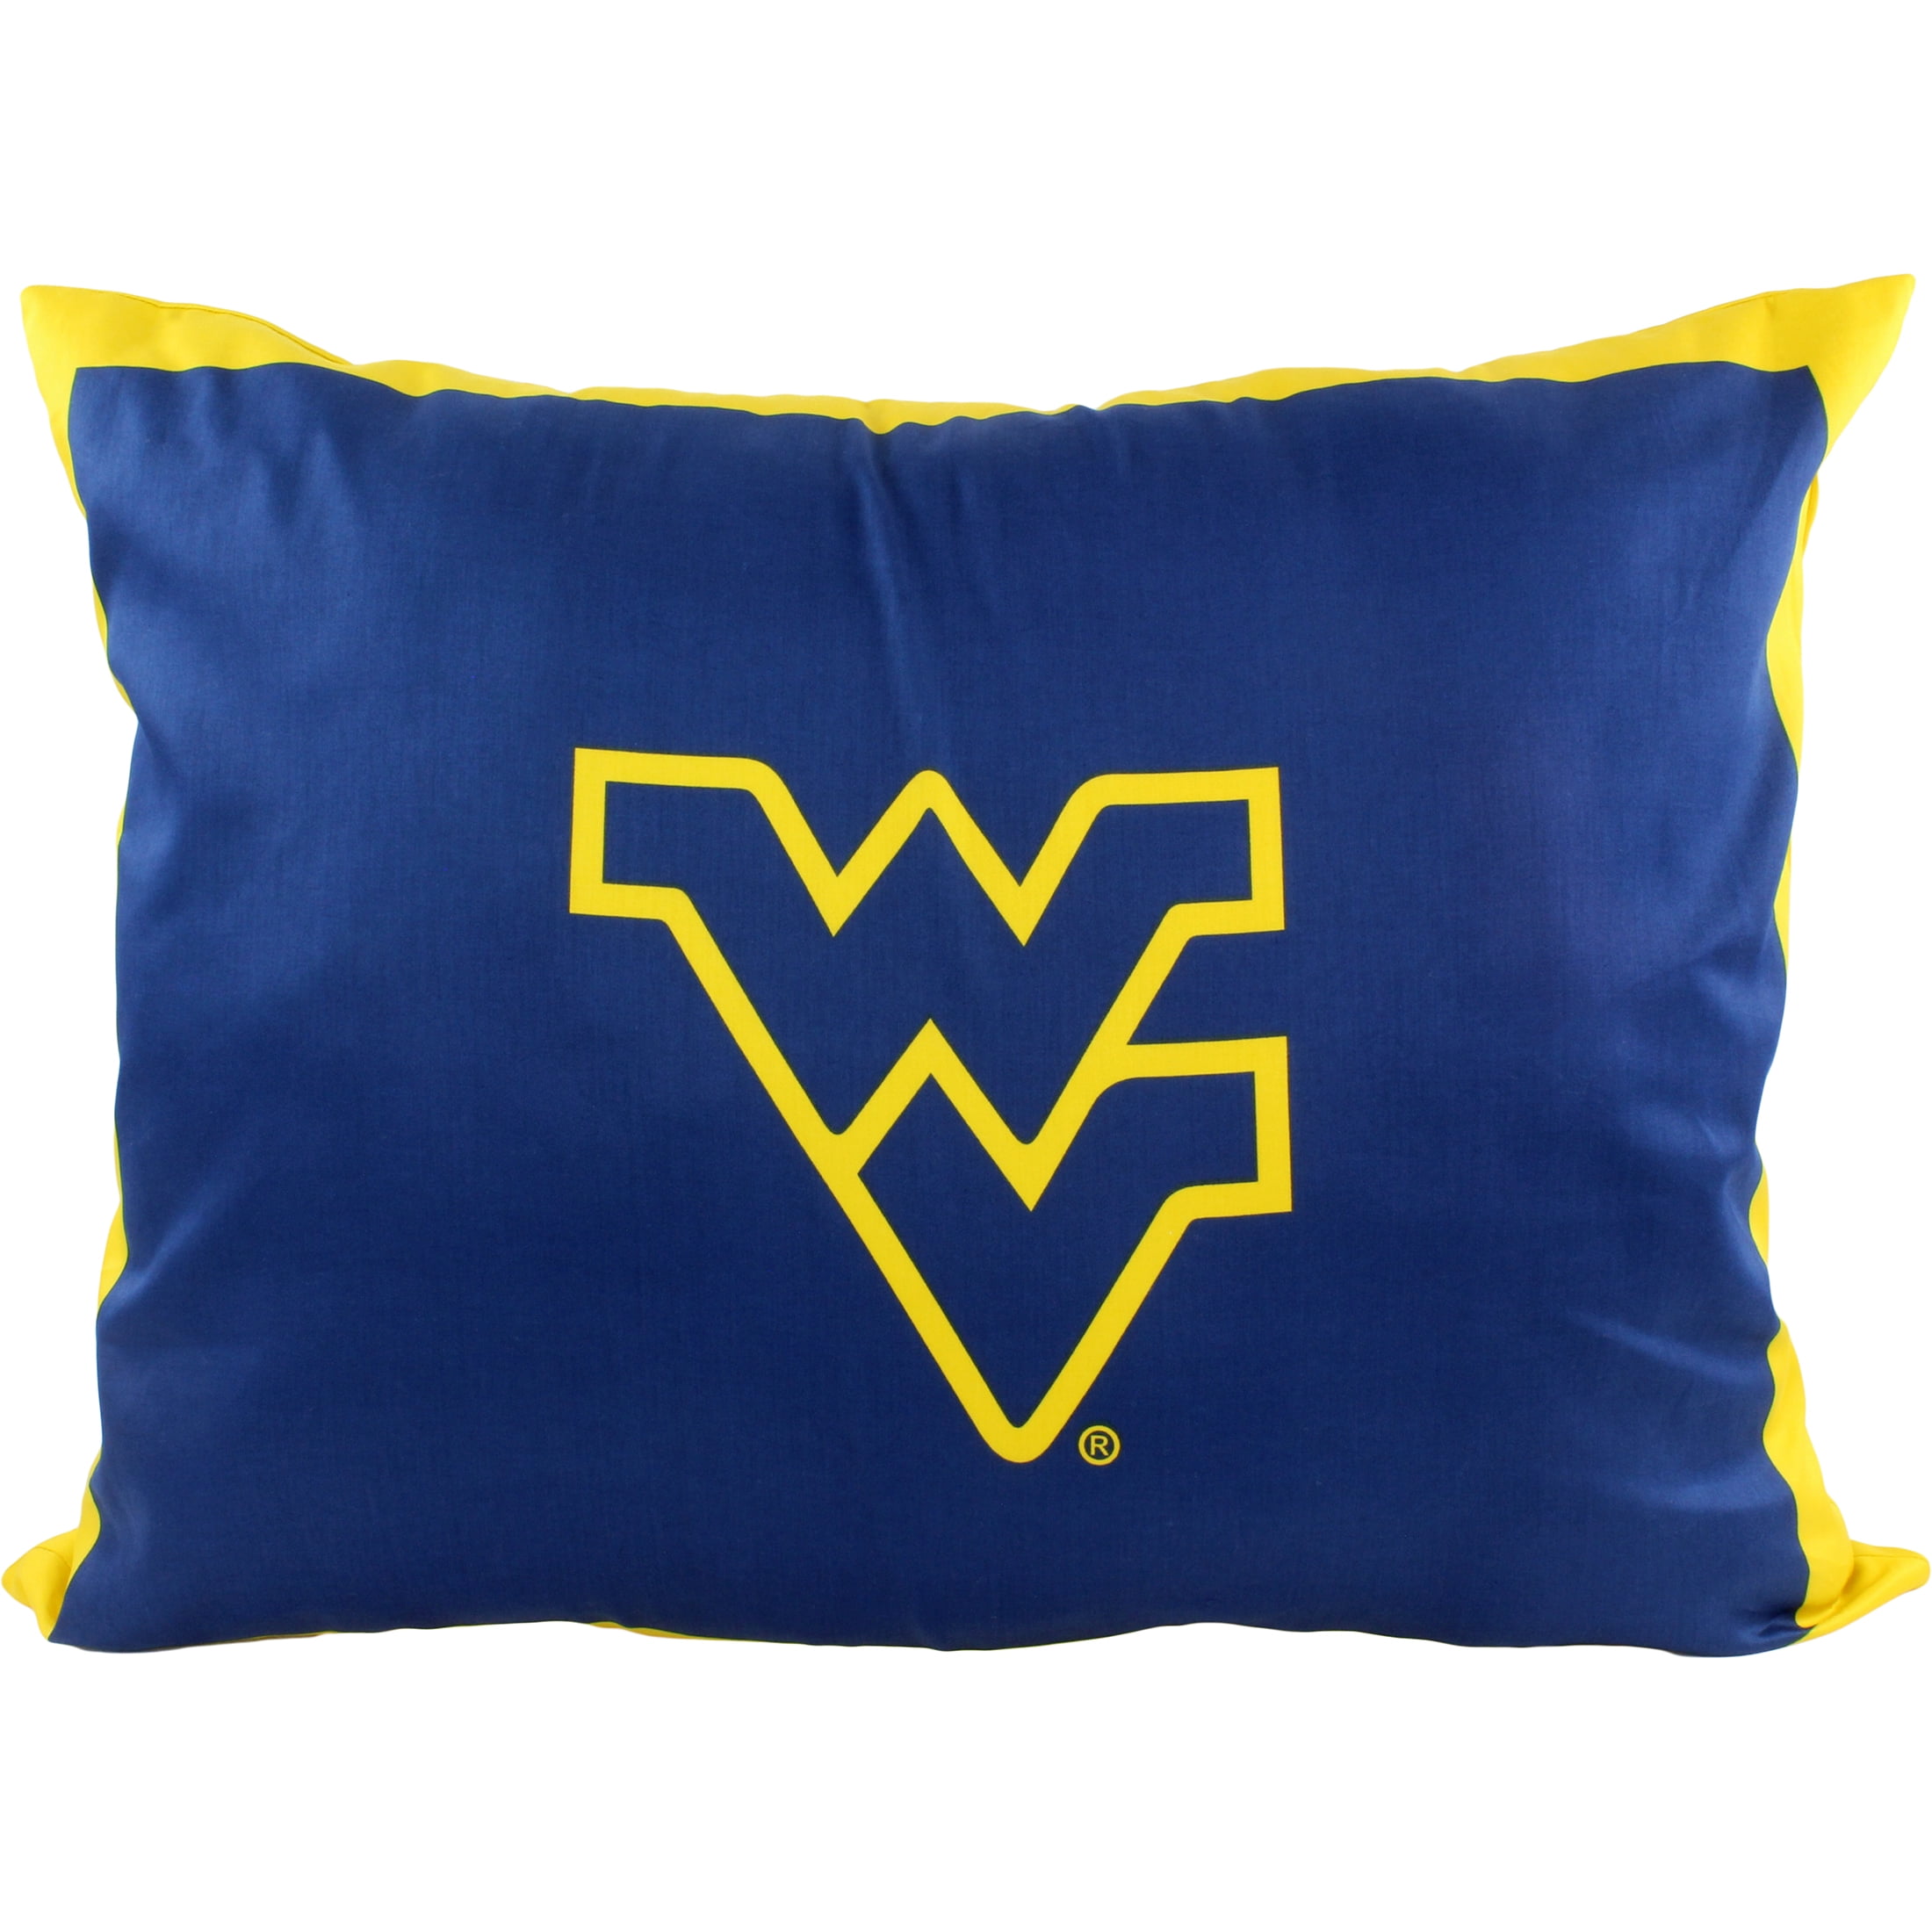 College Covers NCAA Unisex NCAA Licensed Throw Pillow or Decorative Pillow 